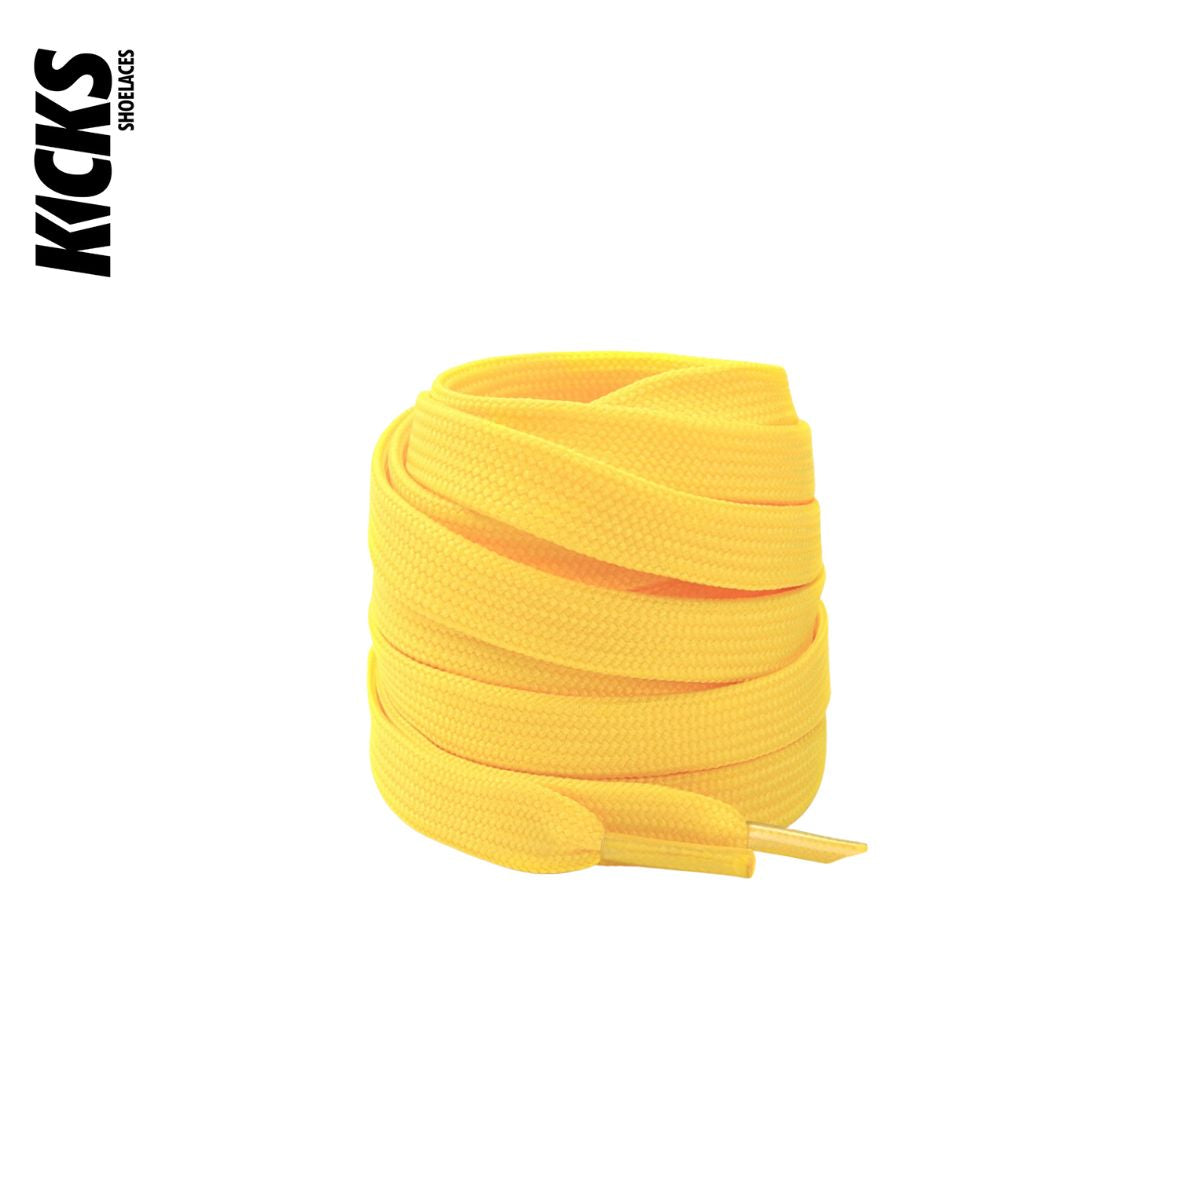 Golden Yellow Nike Dunks Shoelace Replacements